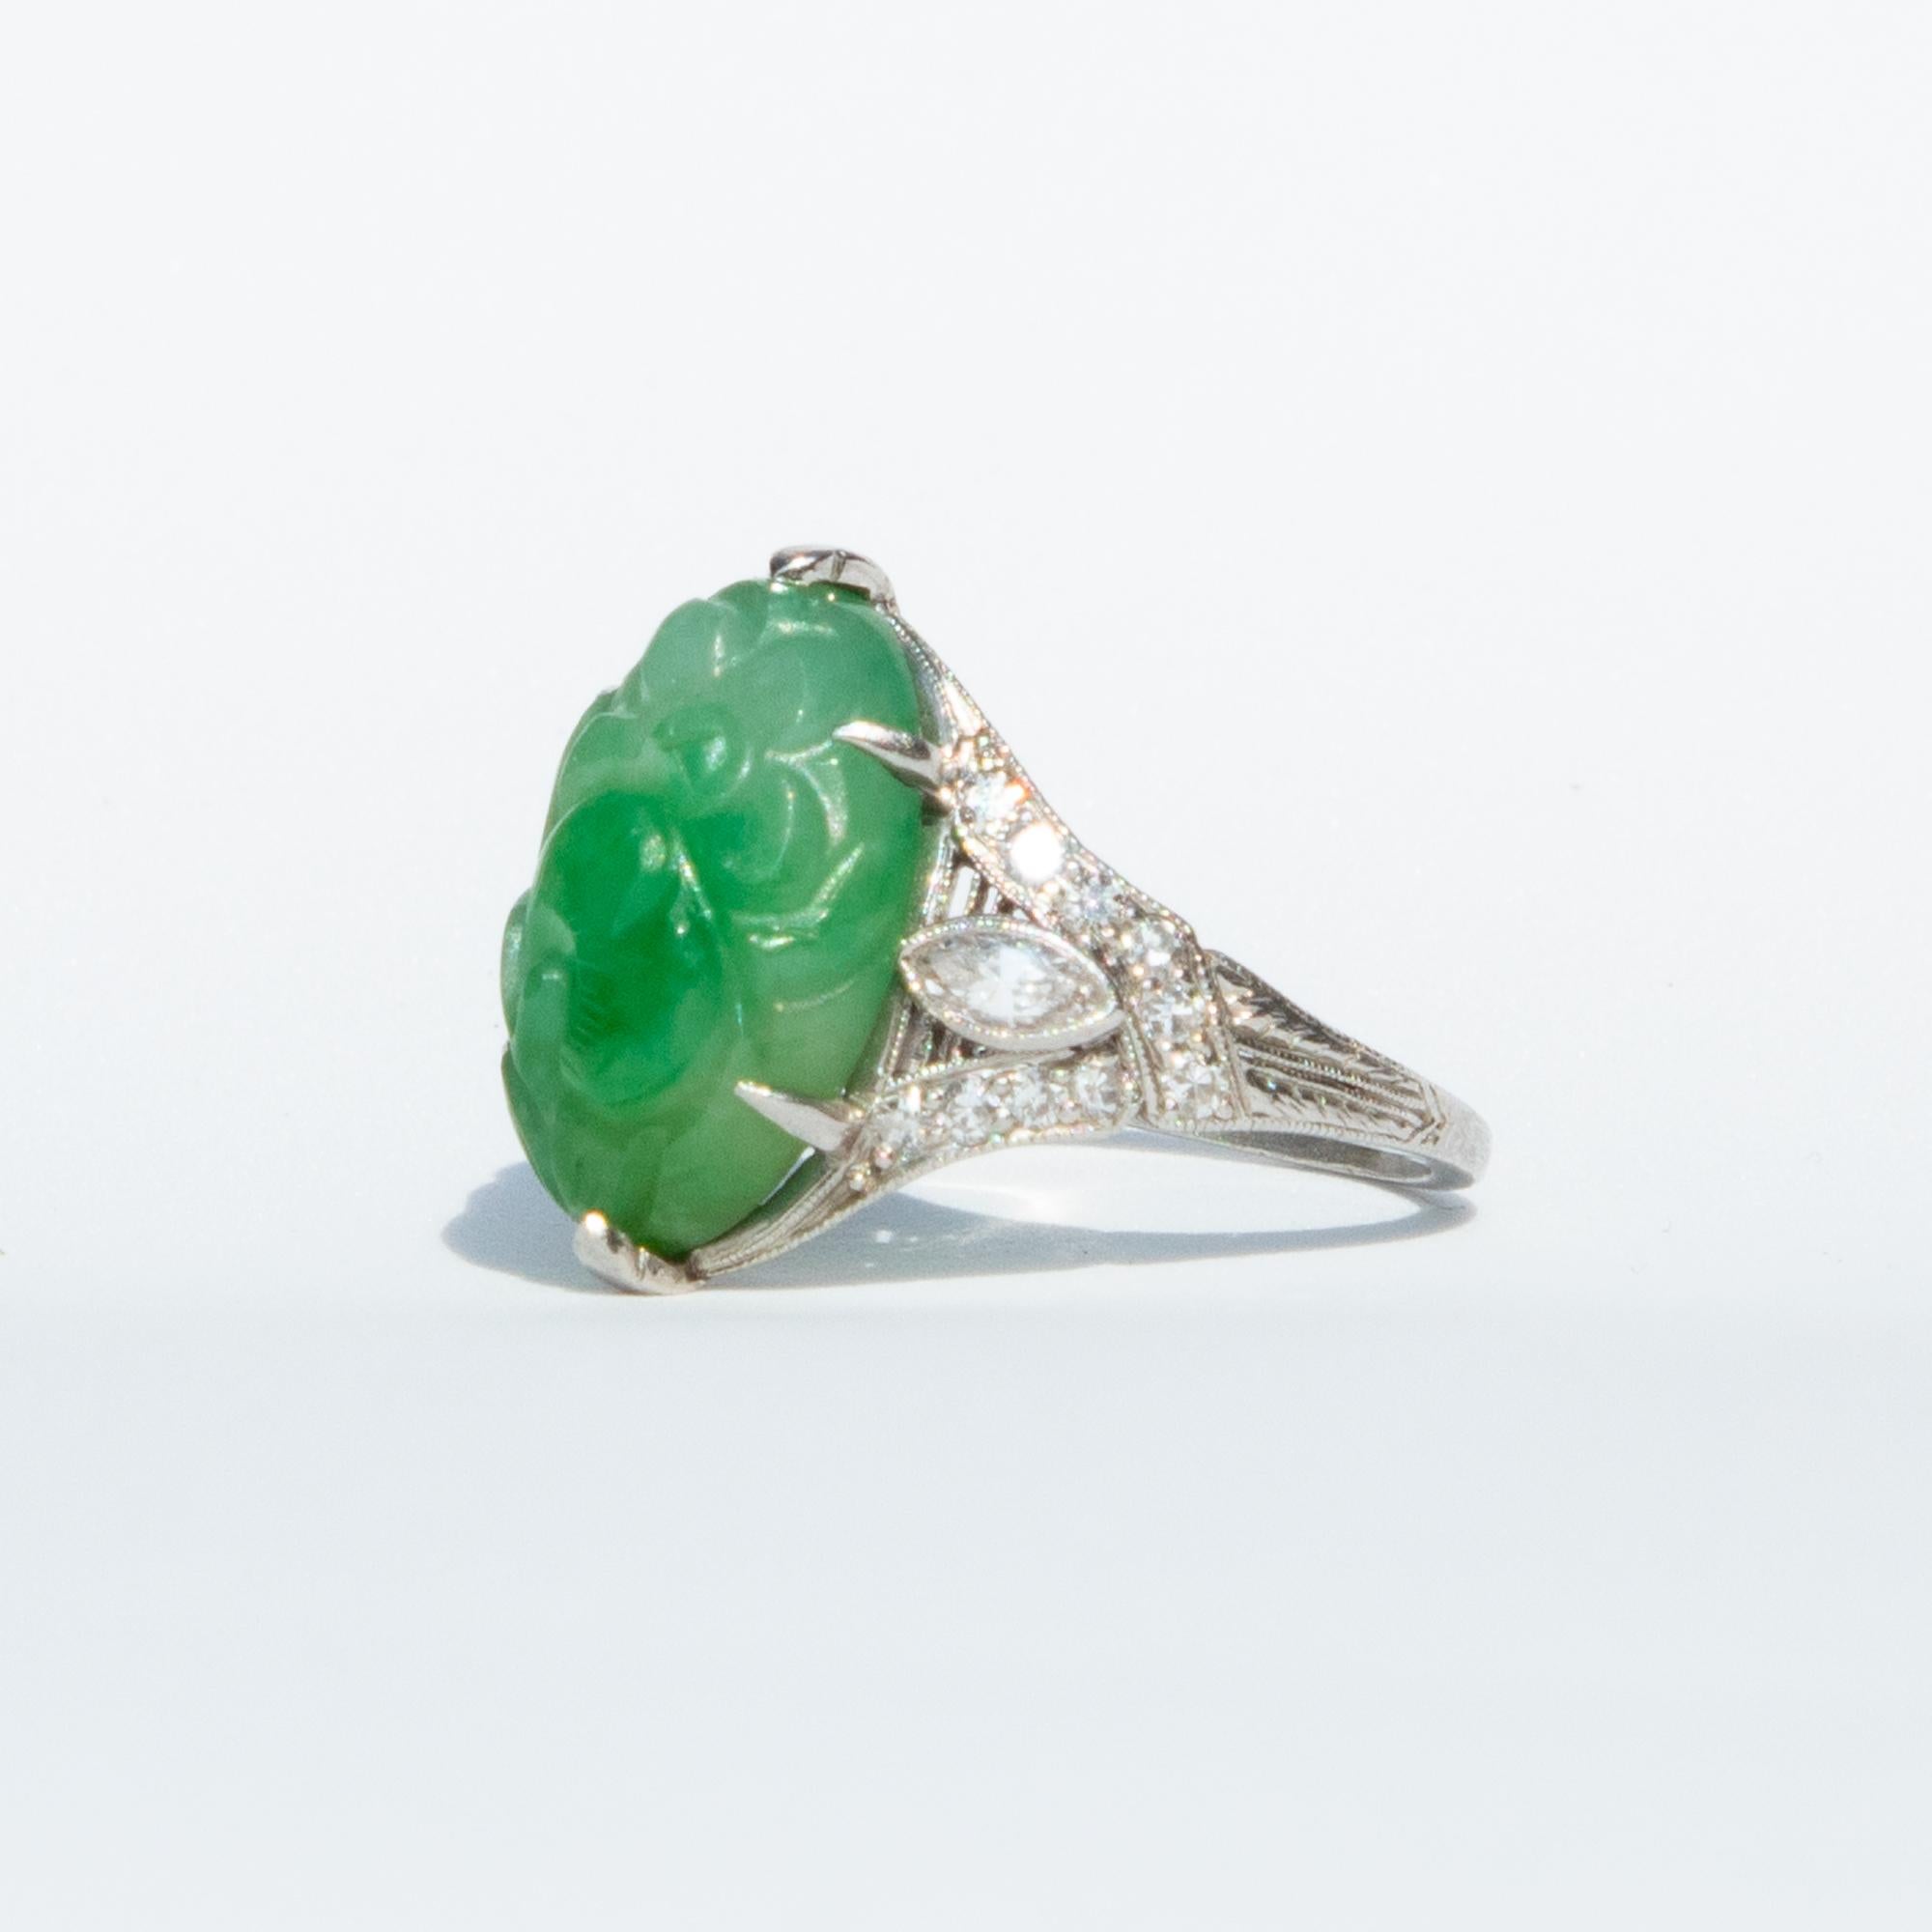 A beautiful jade and diamond ring from the Art Deco era. This rind boasts a large hand-carved jade flanked decadent diamond encrusted shoulders, set in platinum. Total diamond weight certified 0.7 carats, H colour and SI-1. 

The carved Jade is